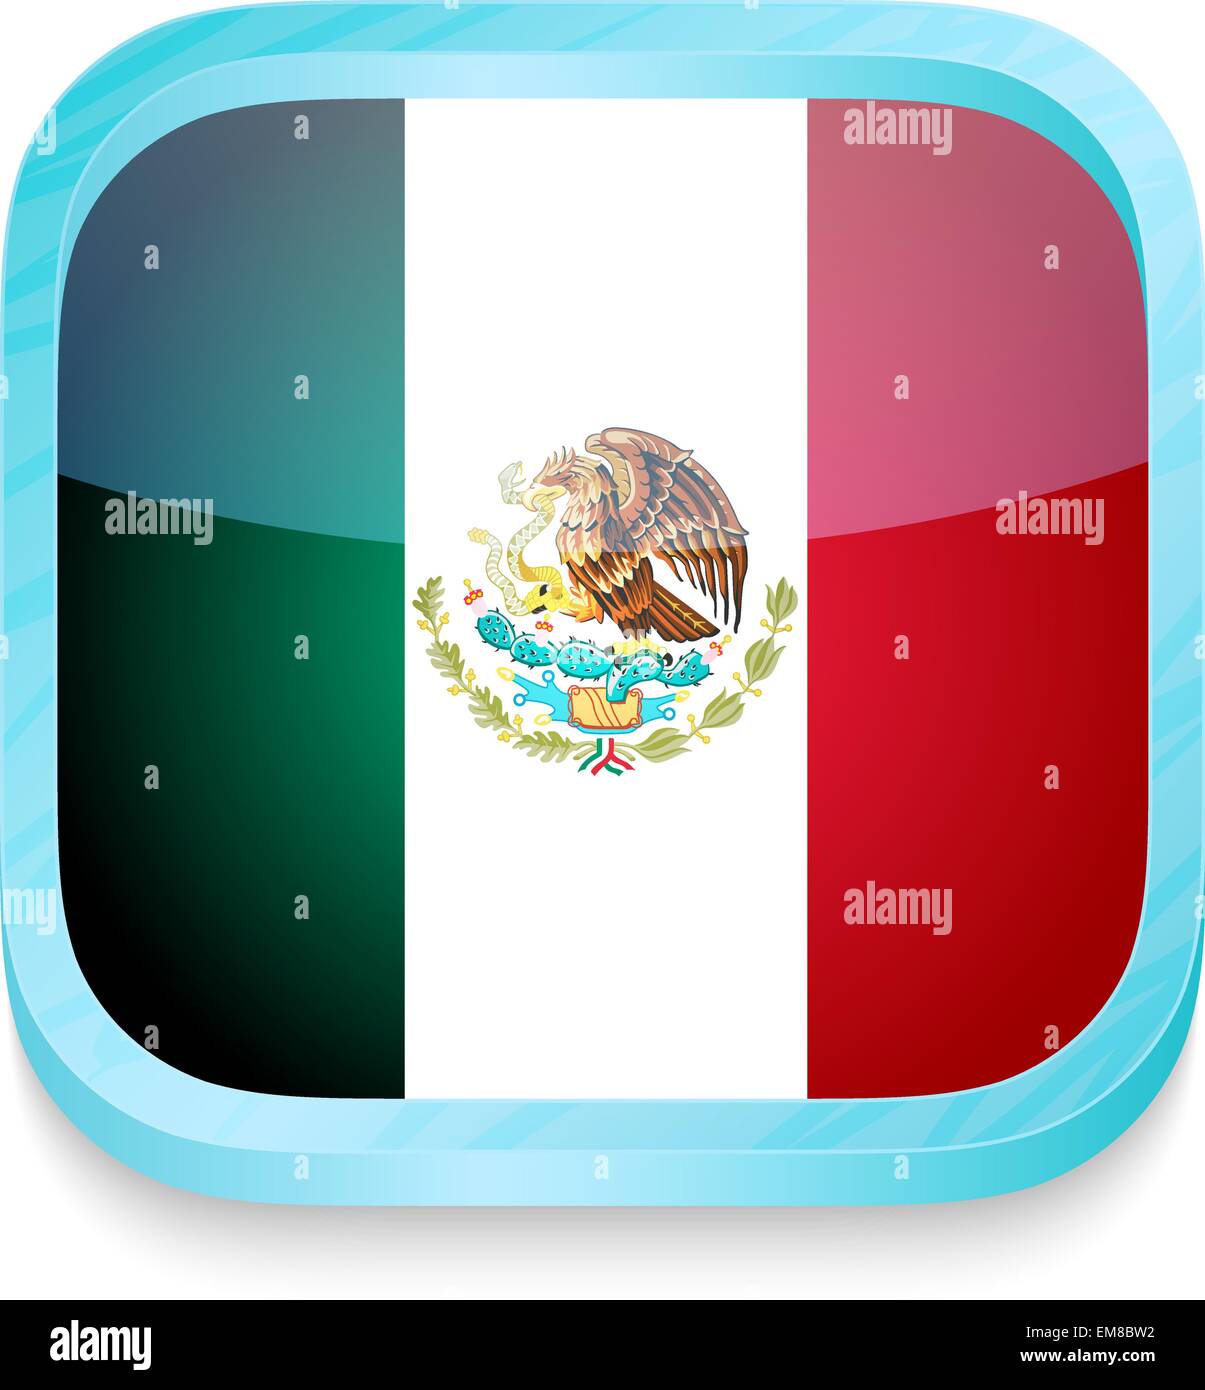 Smart phone button with Mexican flag Stock Vector